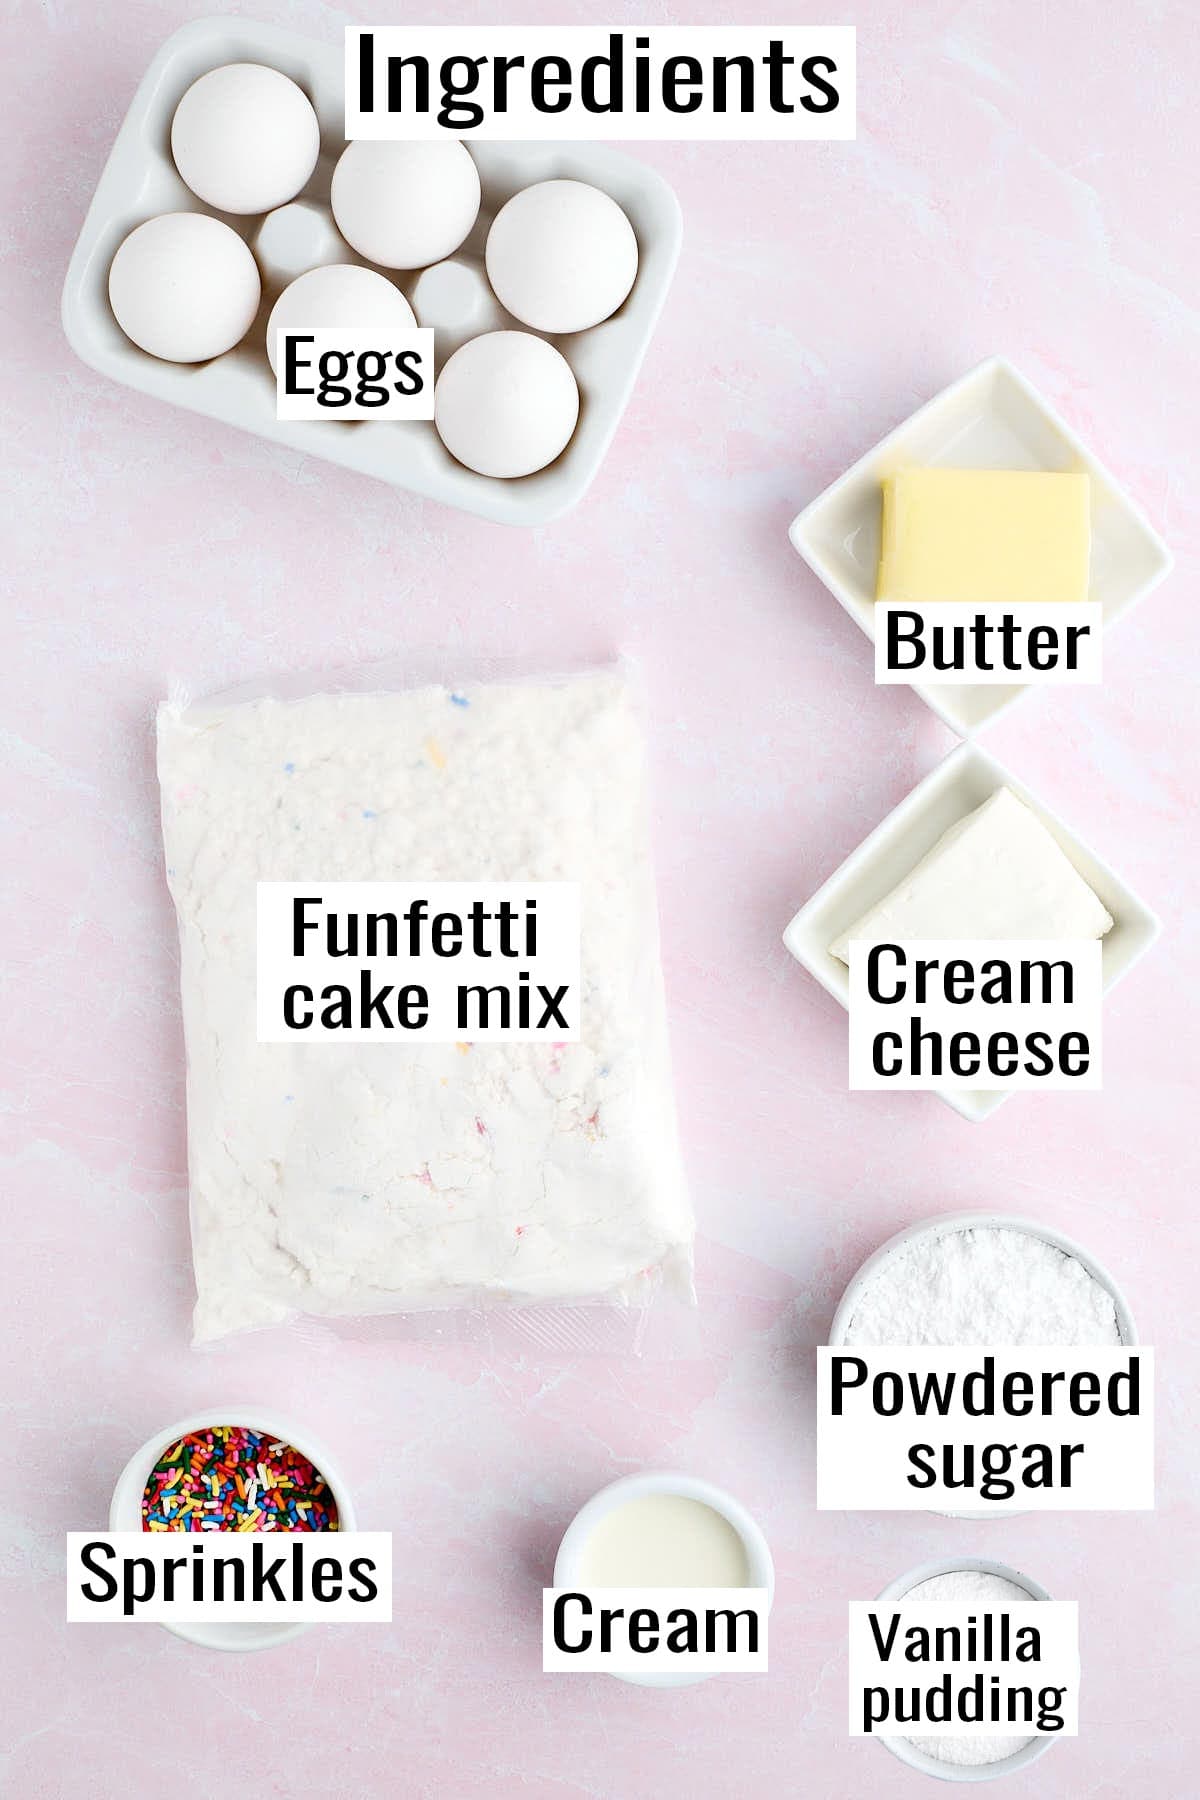 Ingredients for Funfetti cookie sandwiches laid out on the counter and labeled.